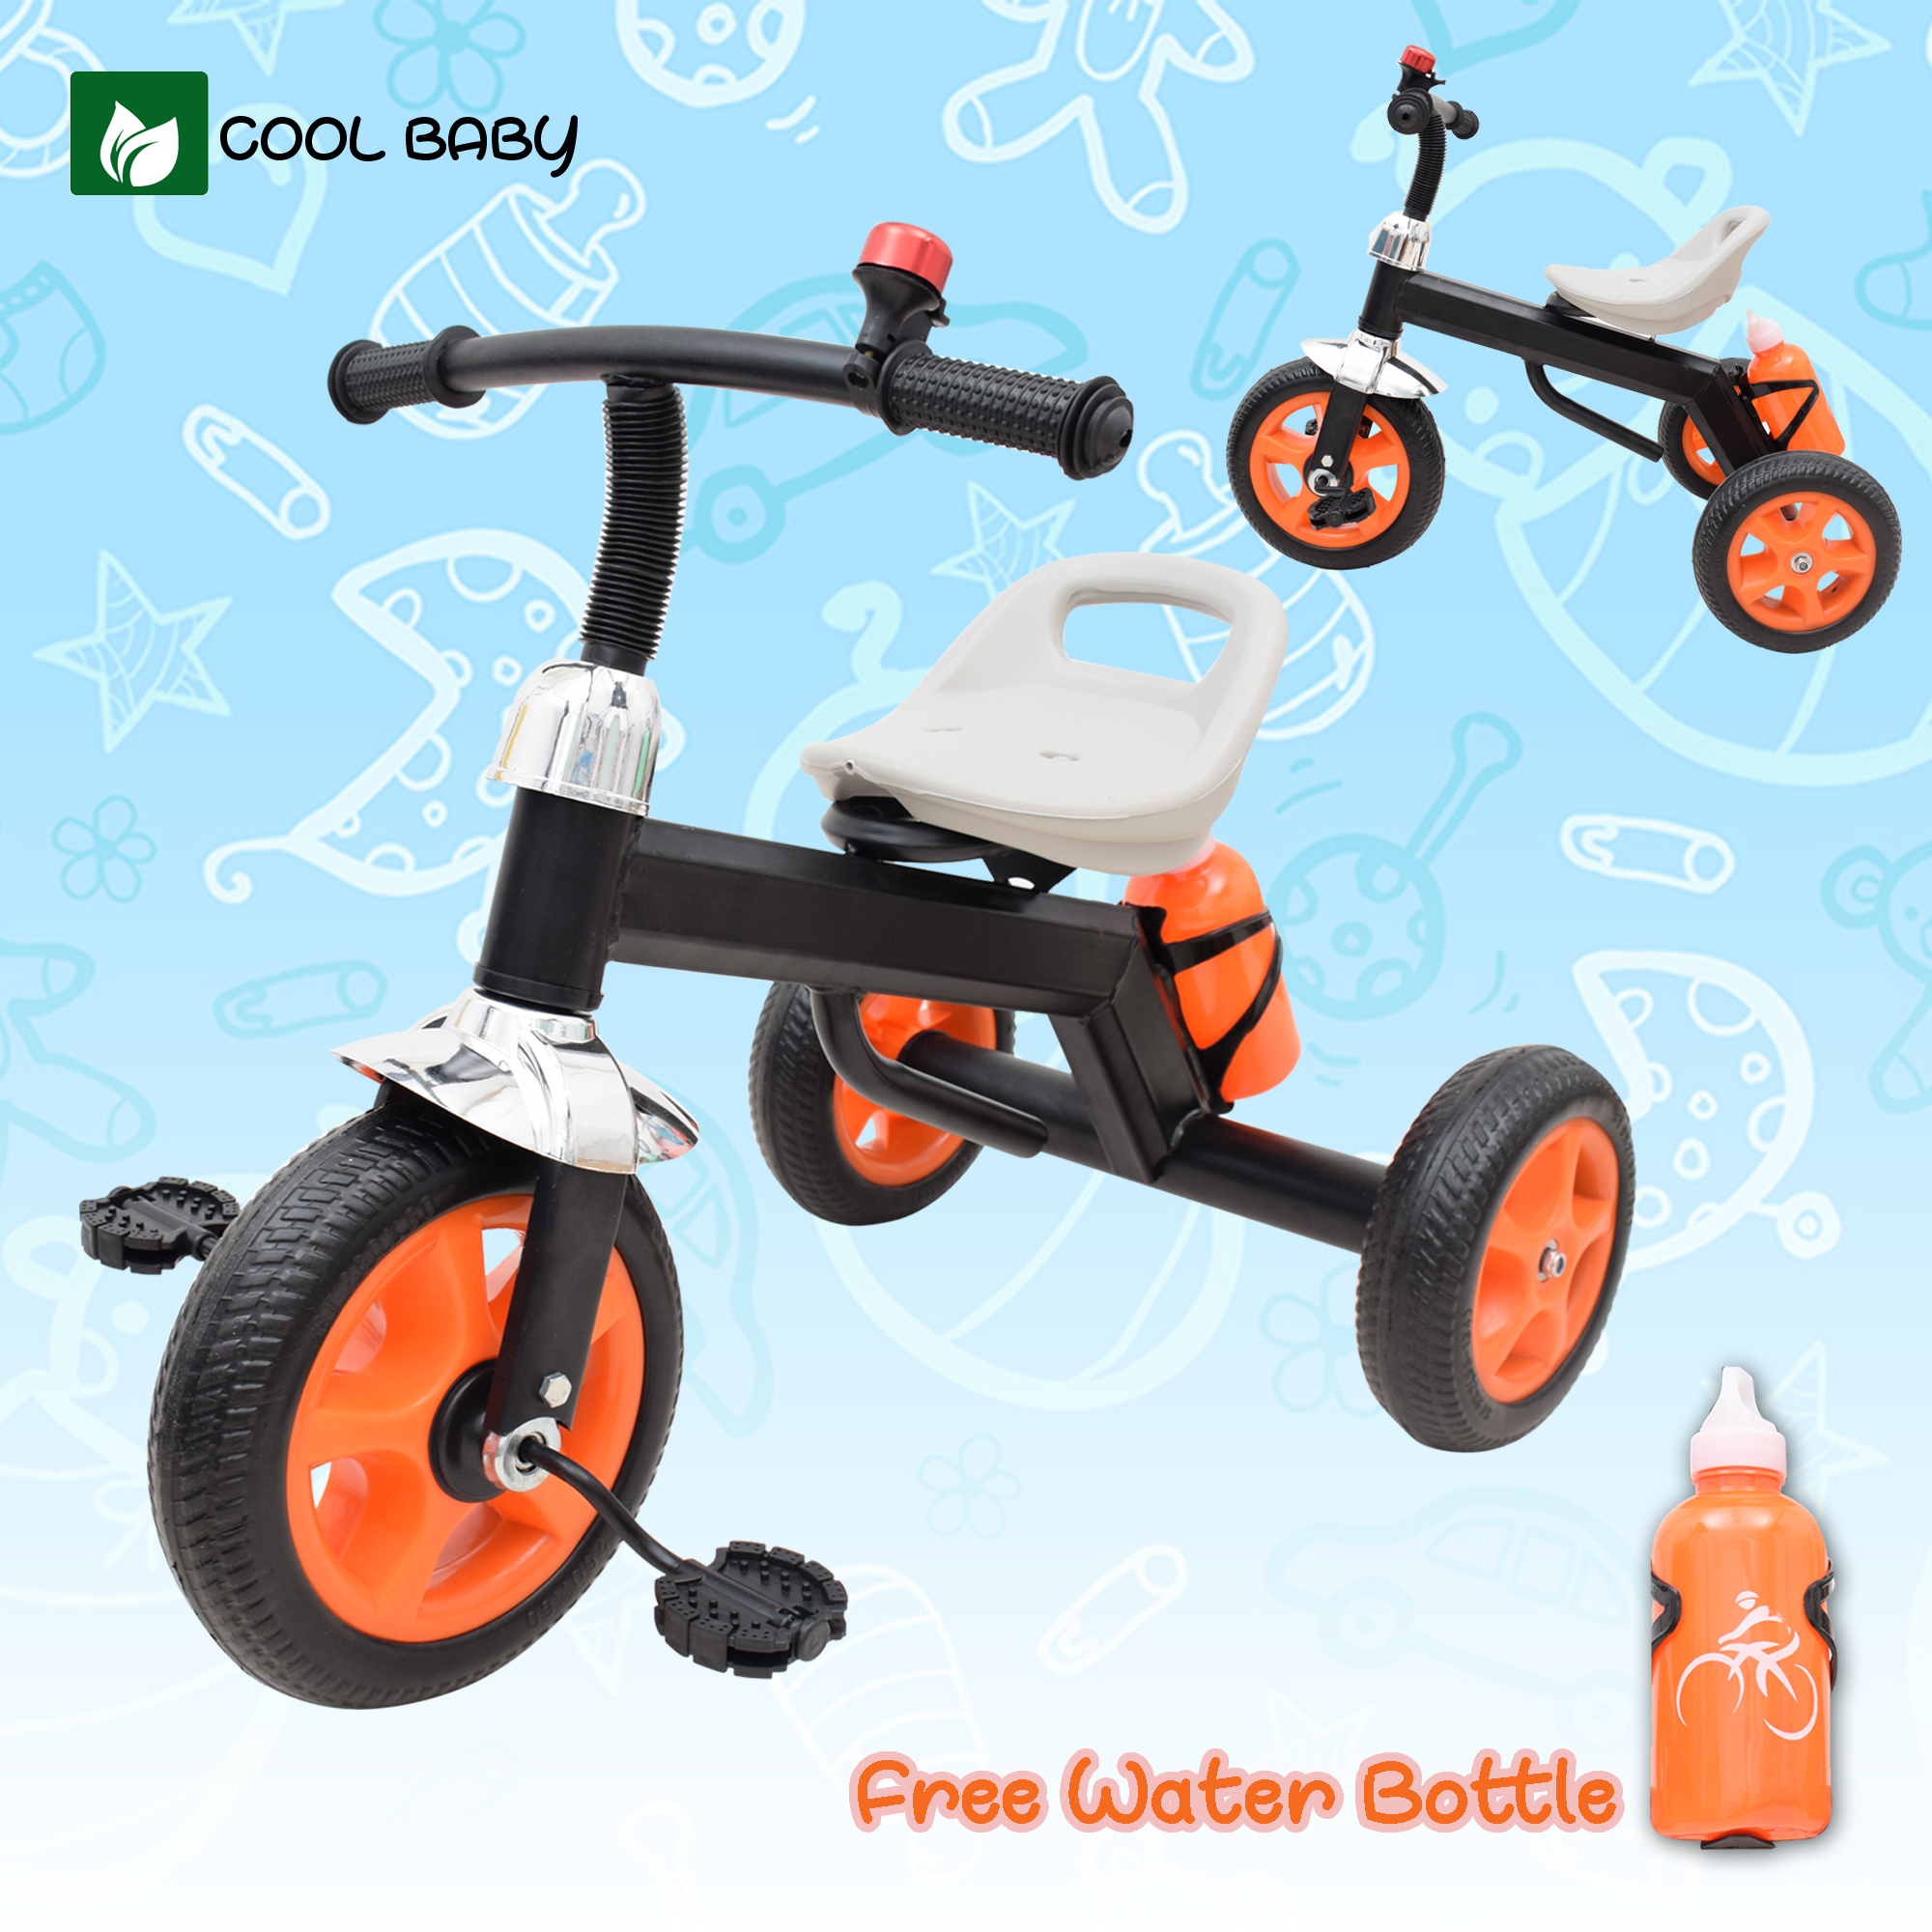 small baby tricycle